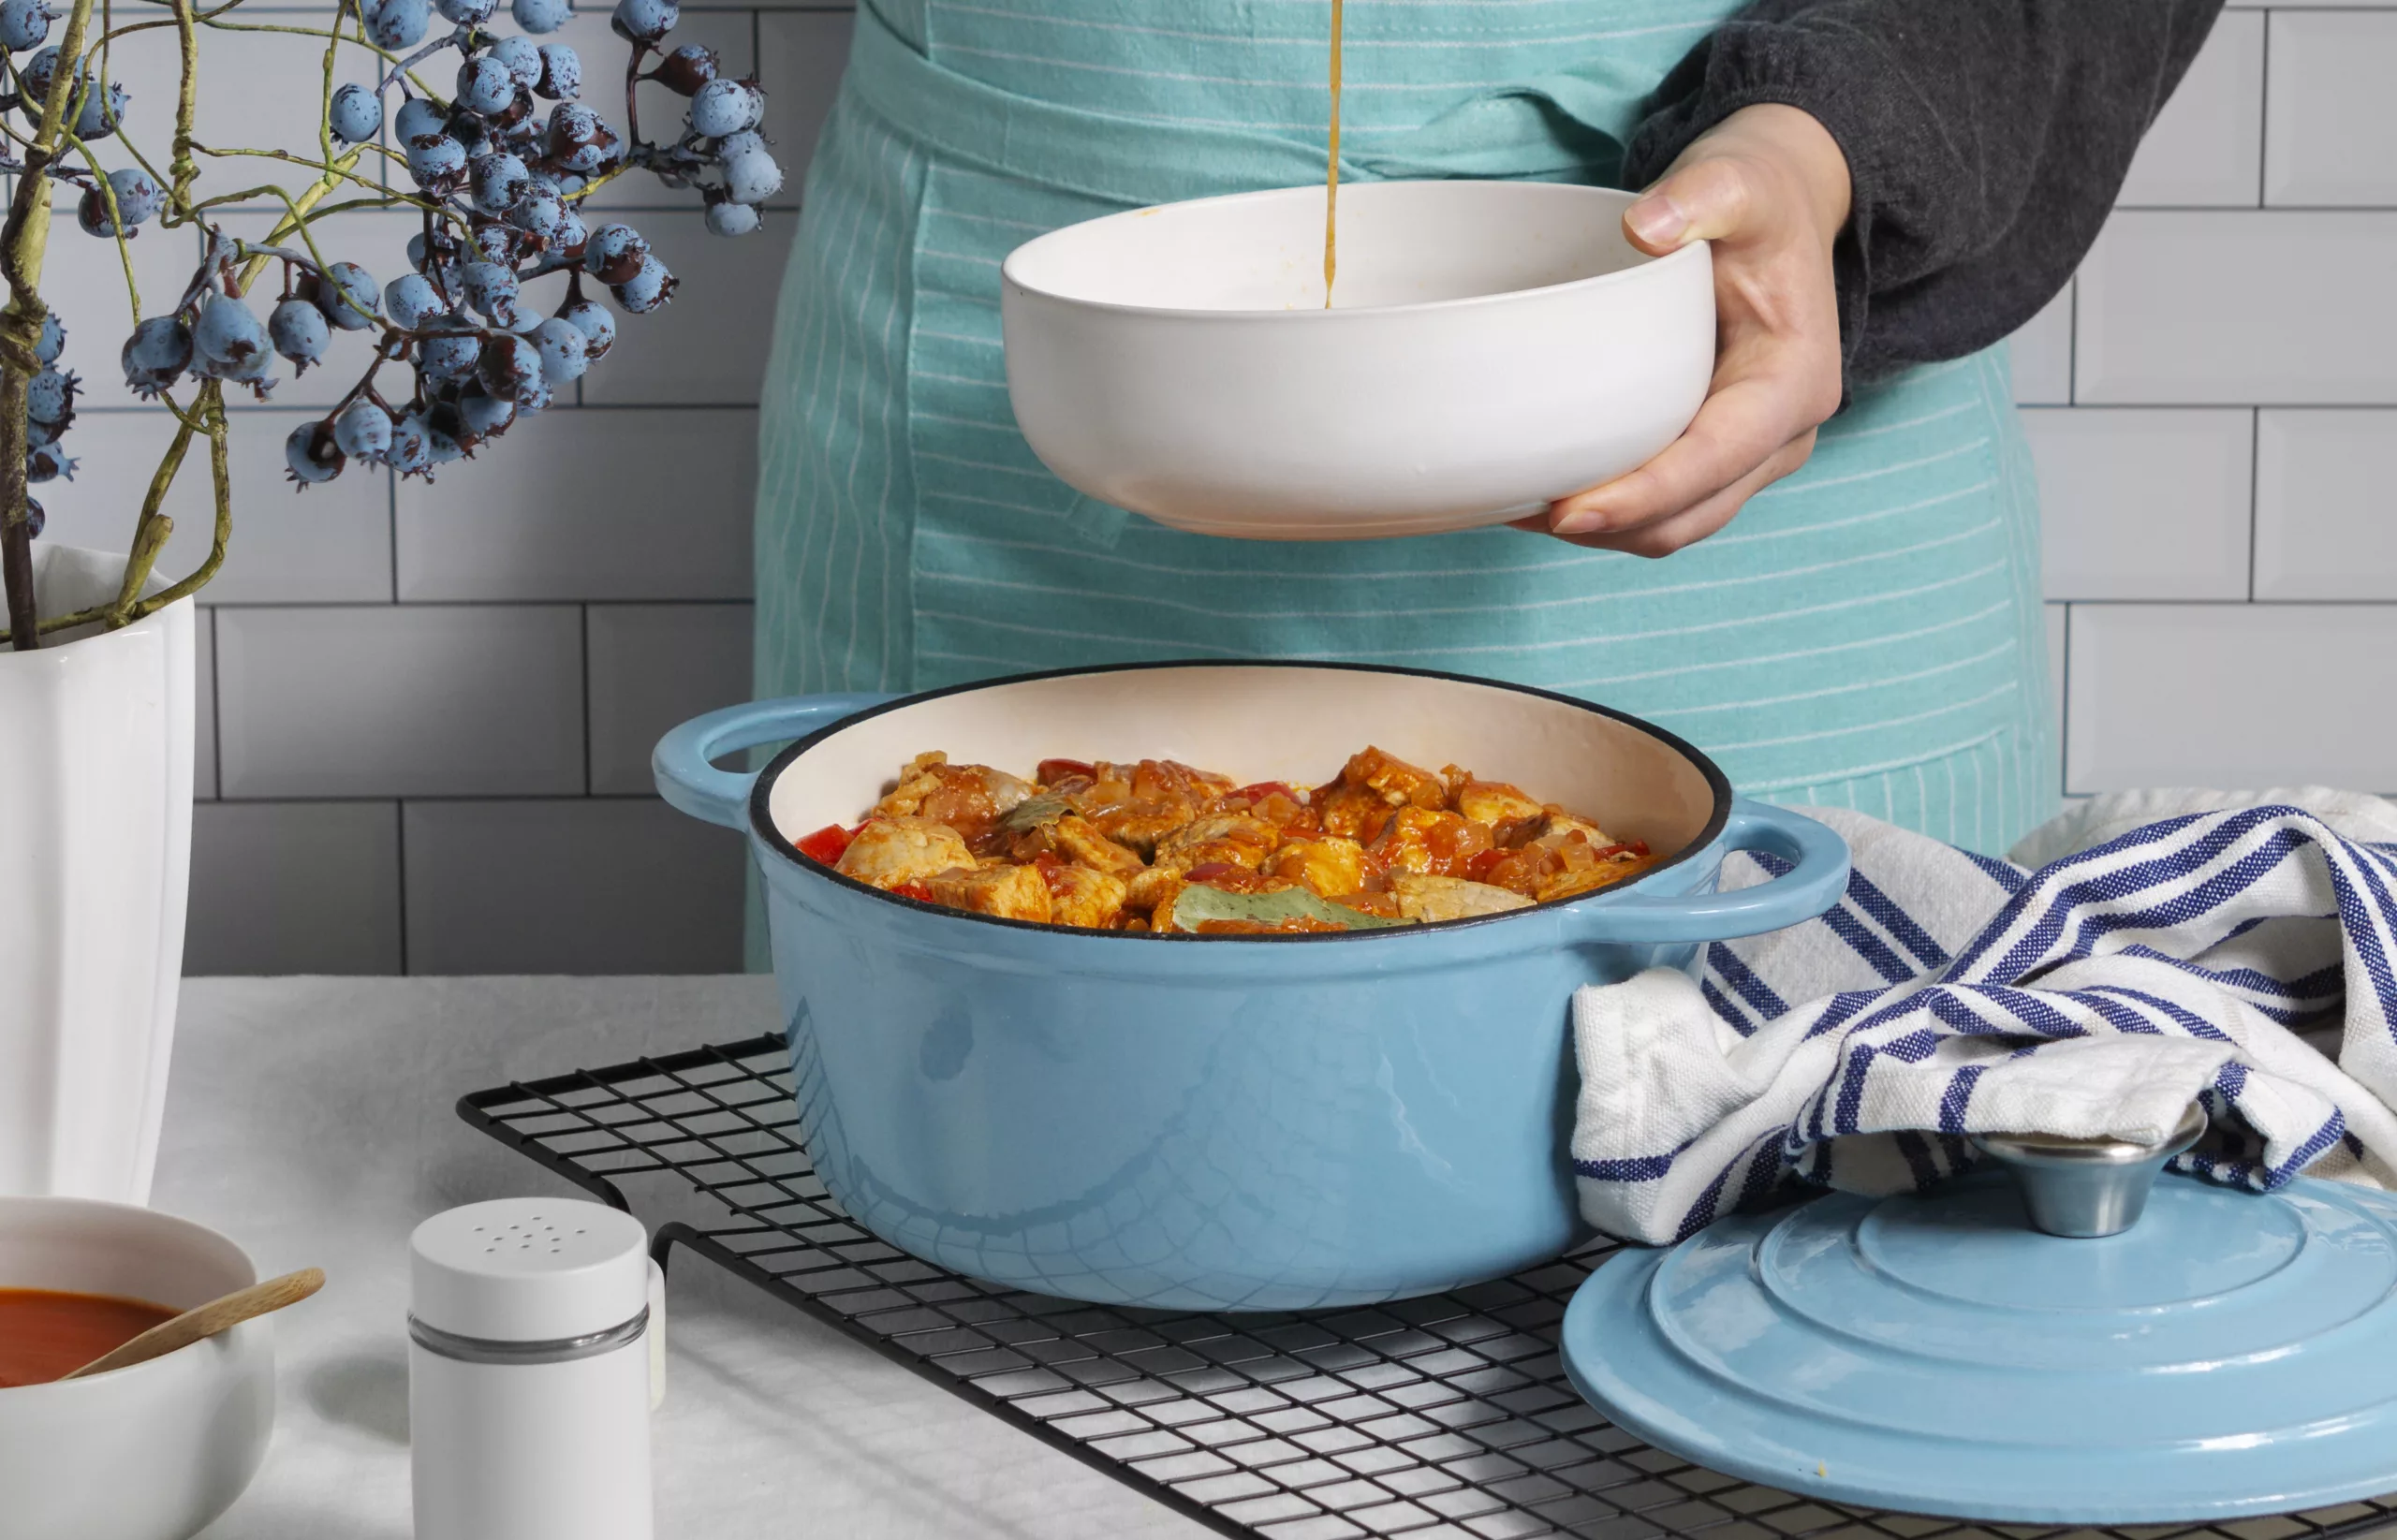 10 Best Ceramic Cookware Sets for Sustainable Kitchens in 2023